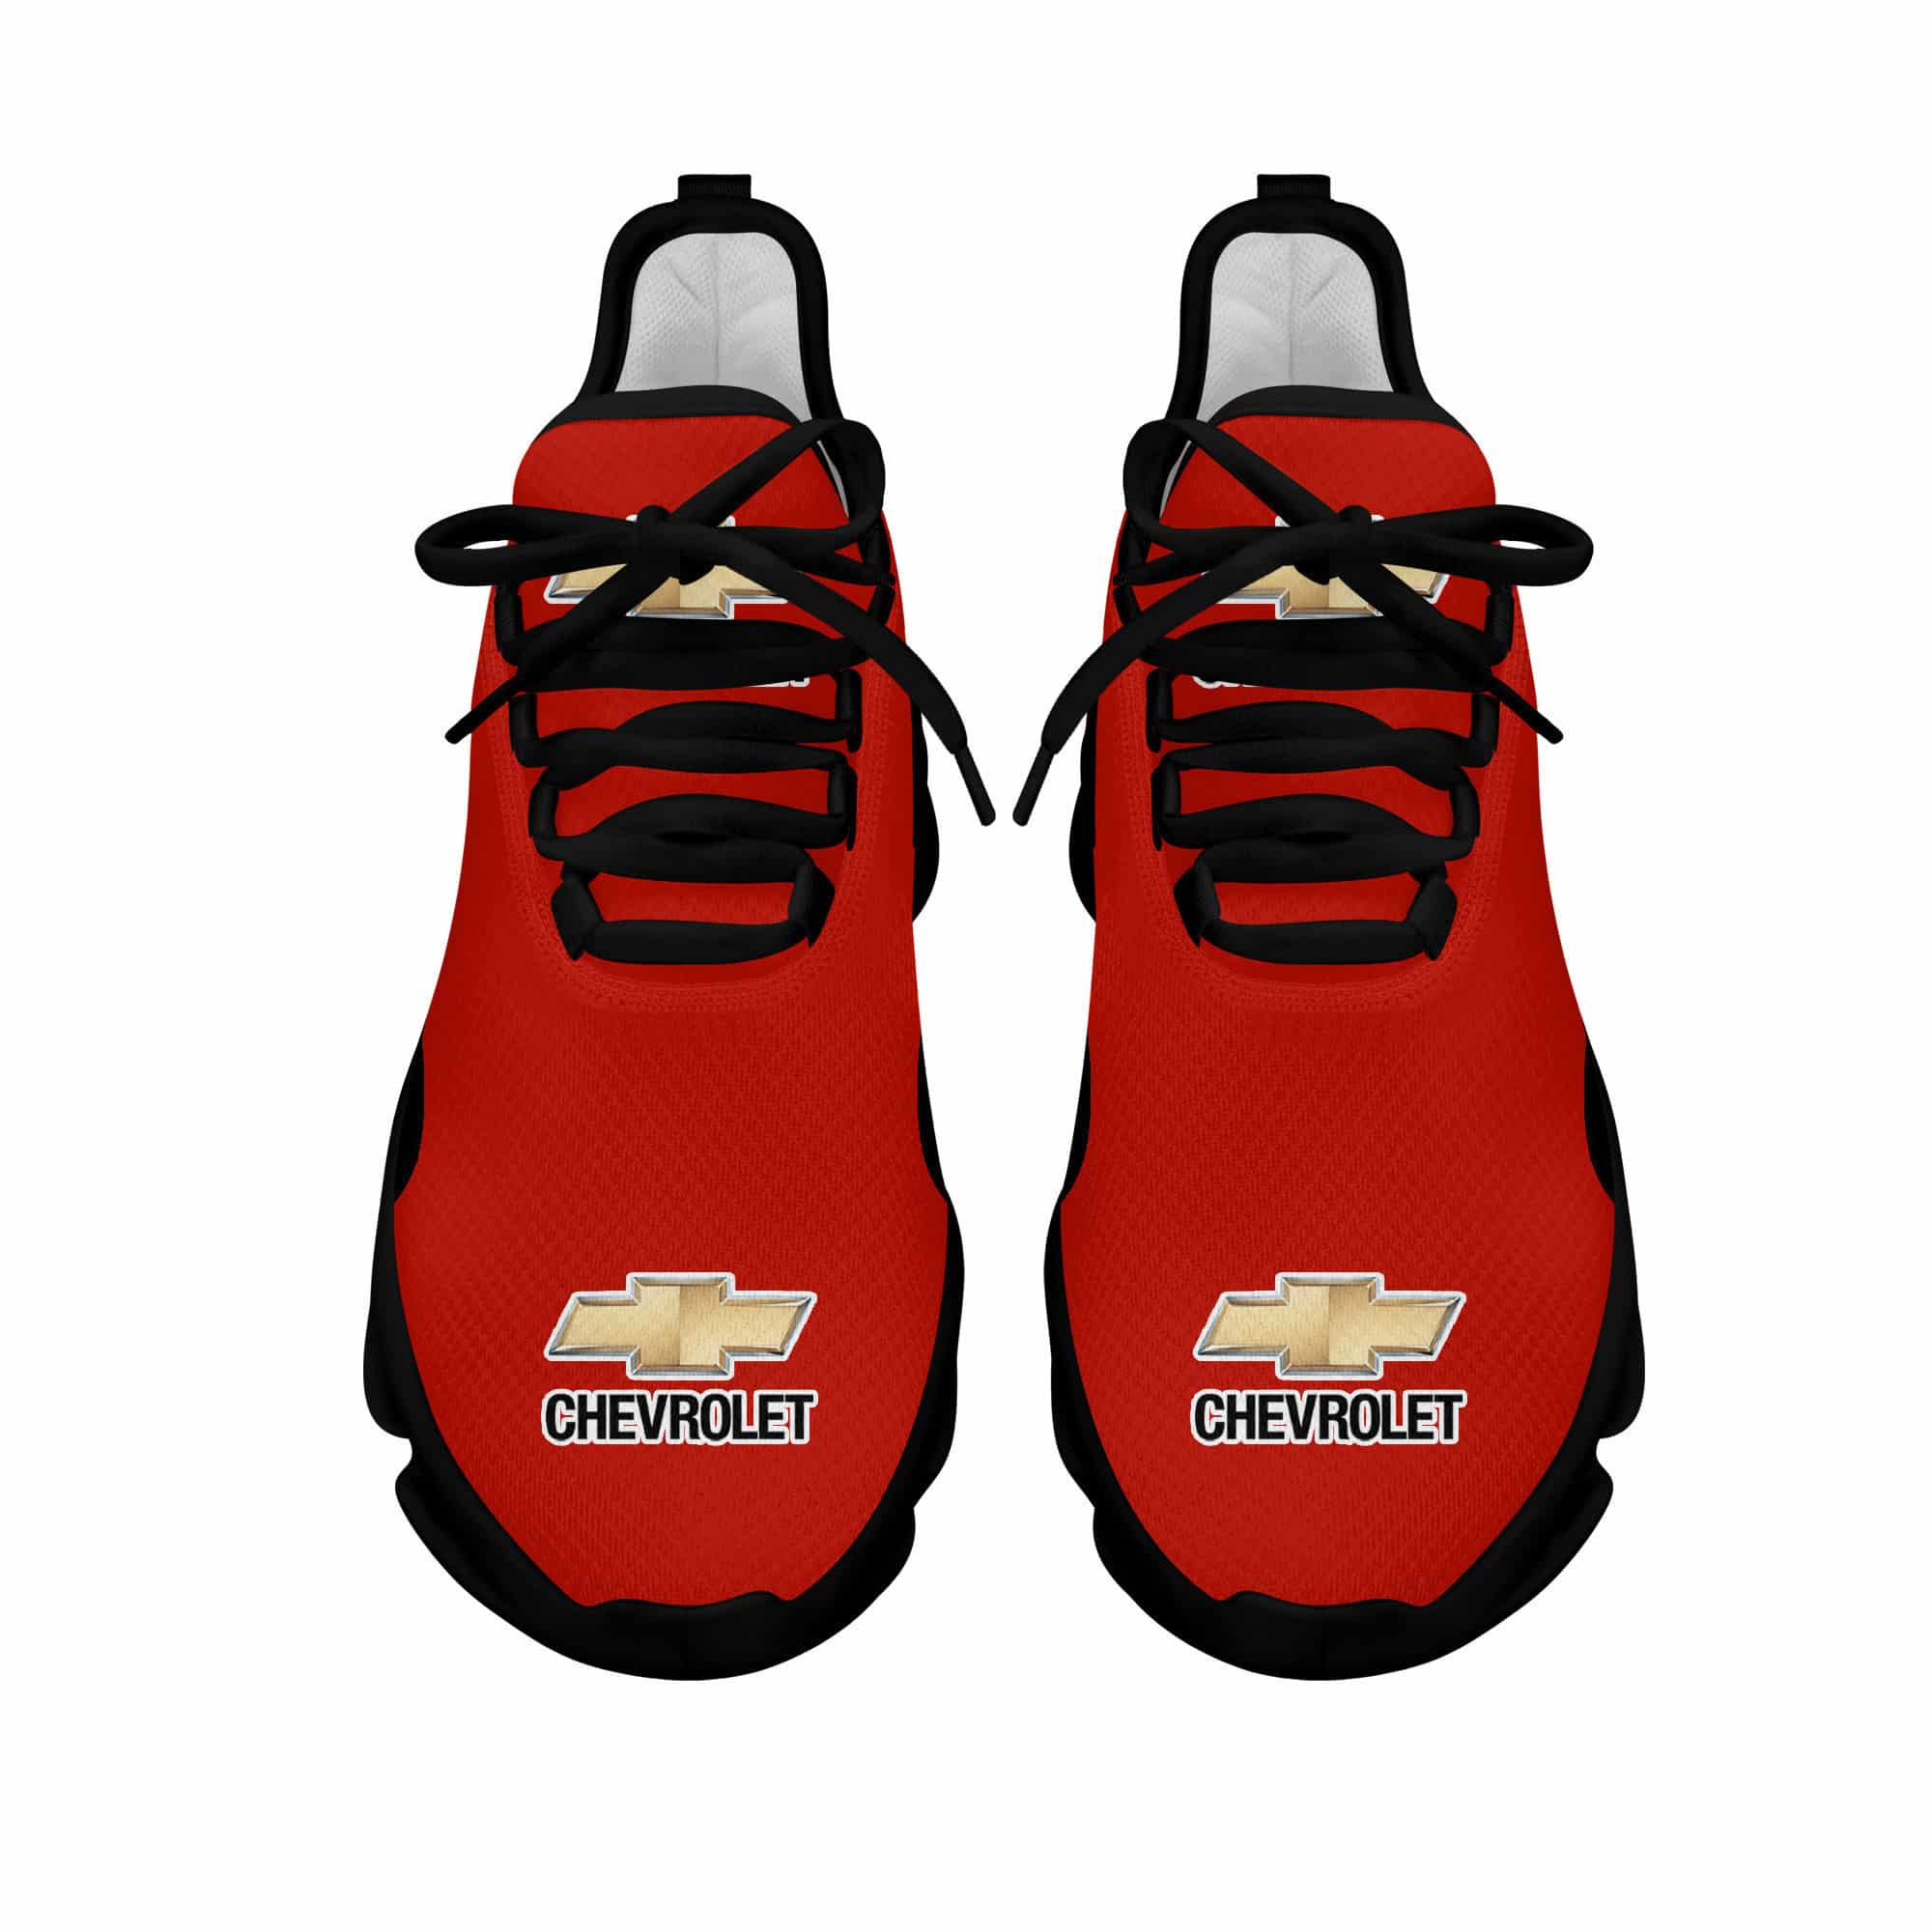 Chevrolet Silverado - Running Shoes Max Soul Shoes Sneakers Ver 1 (Red) 3